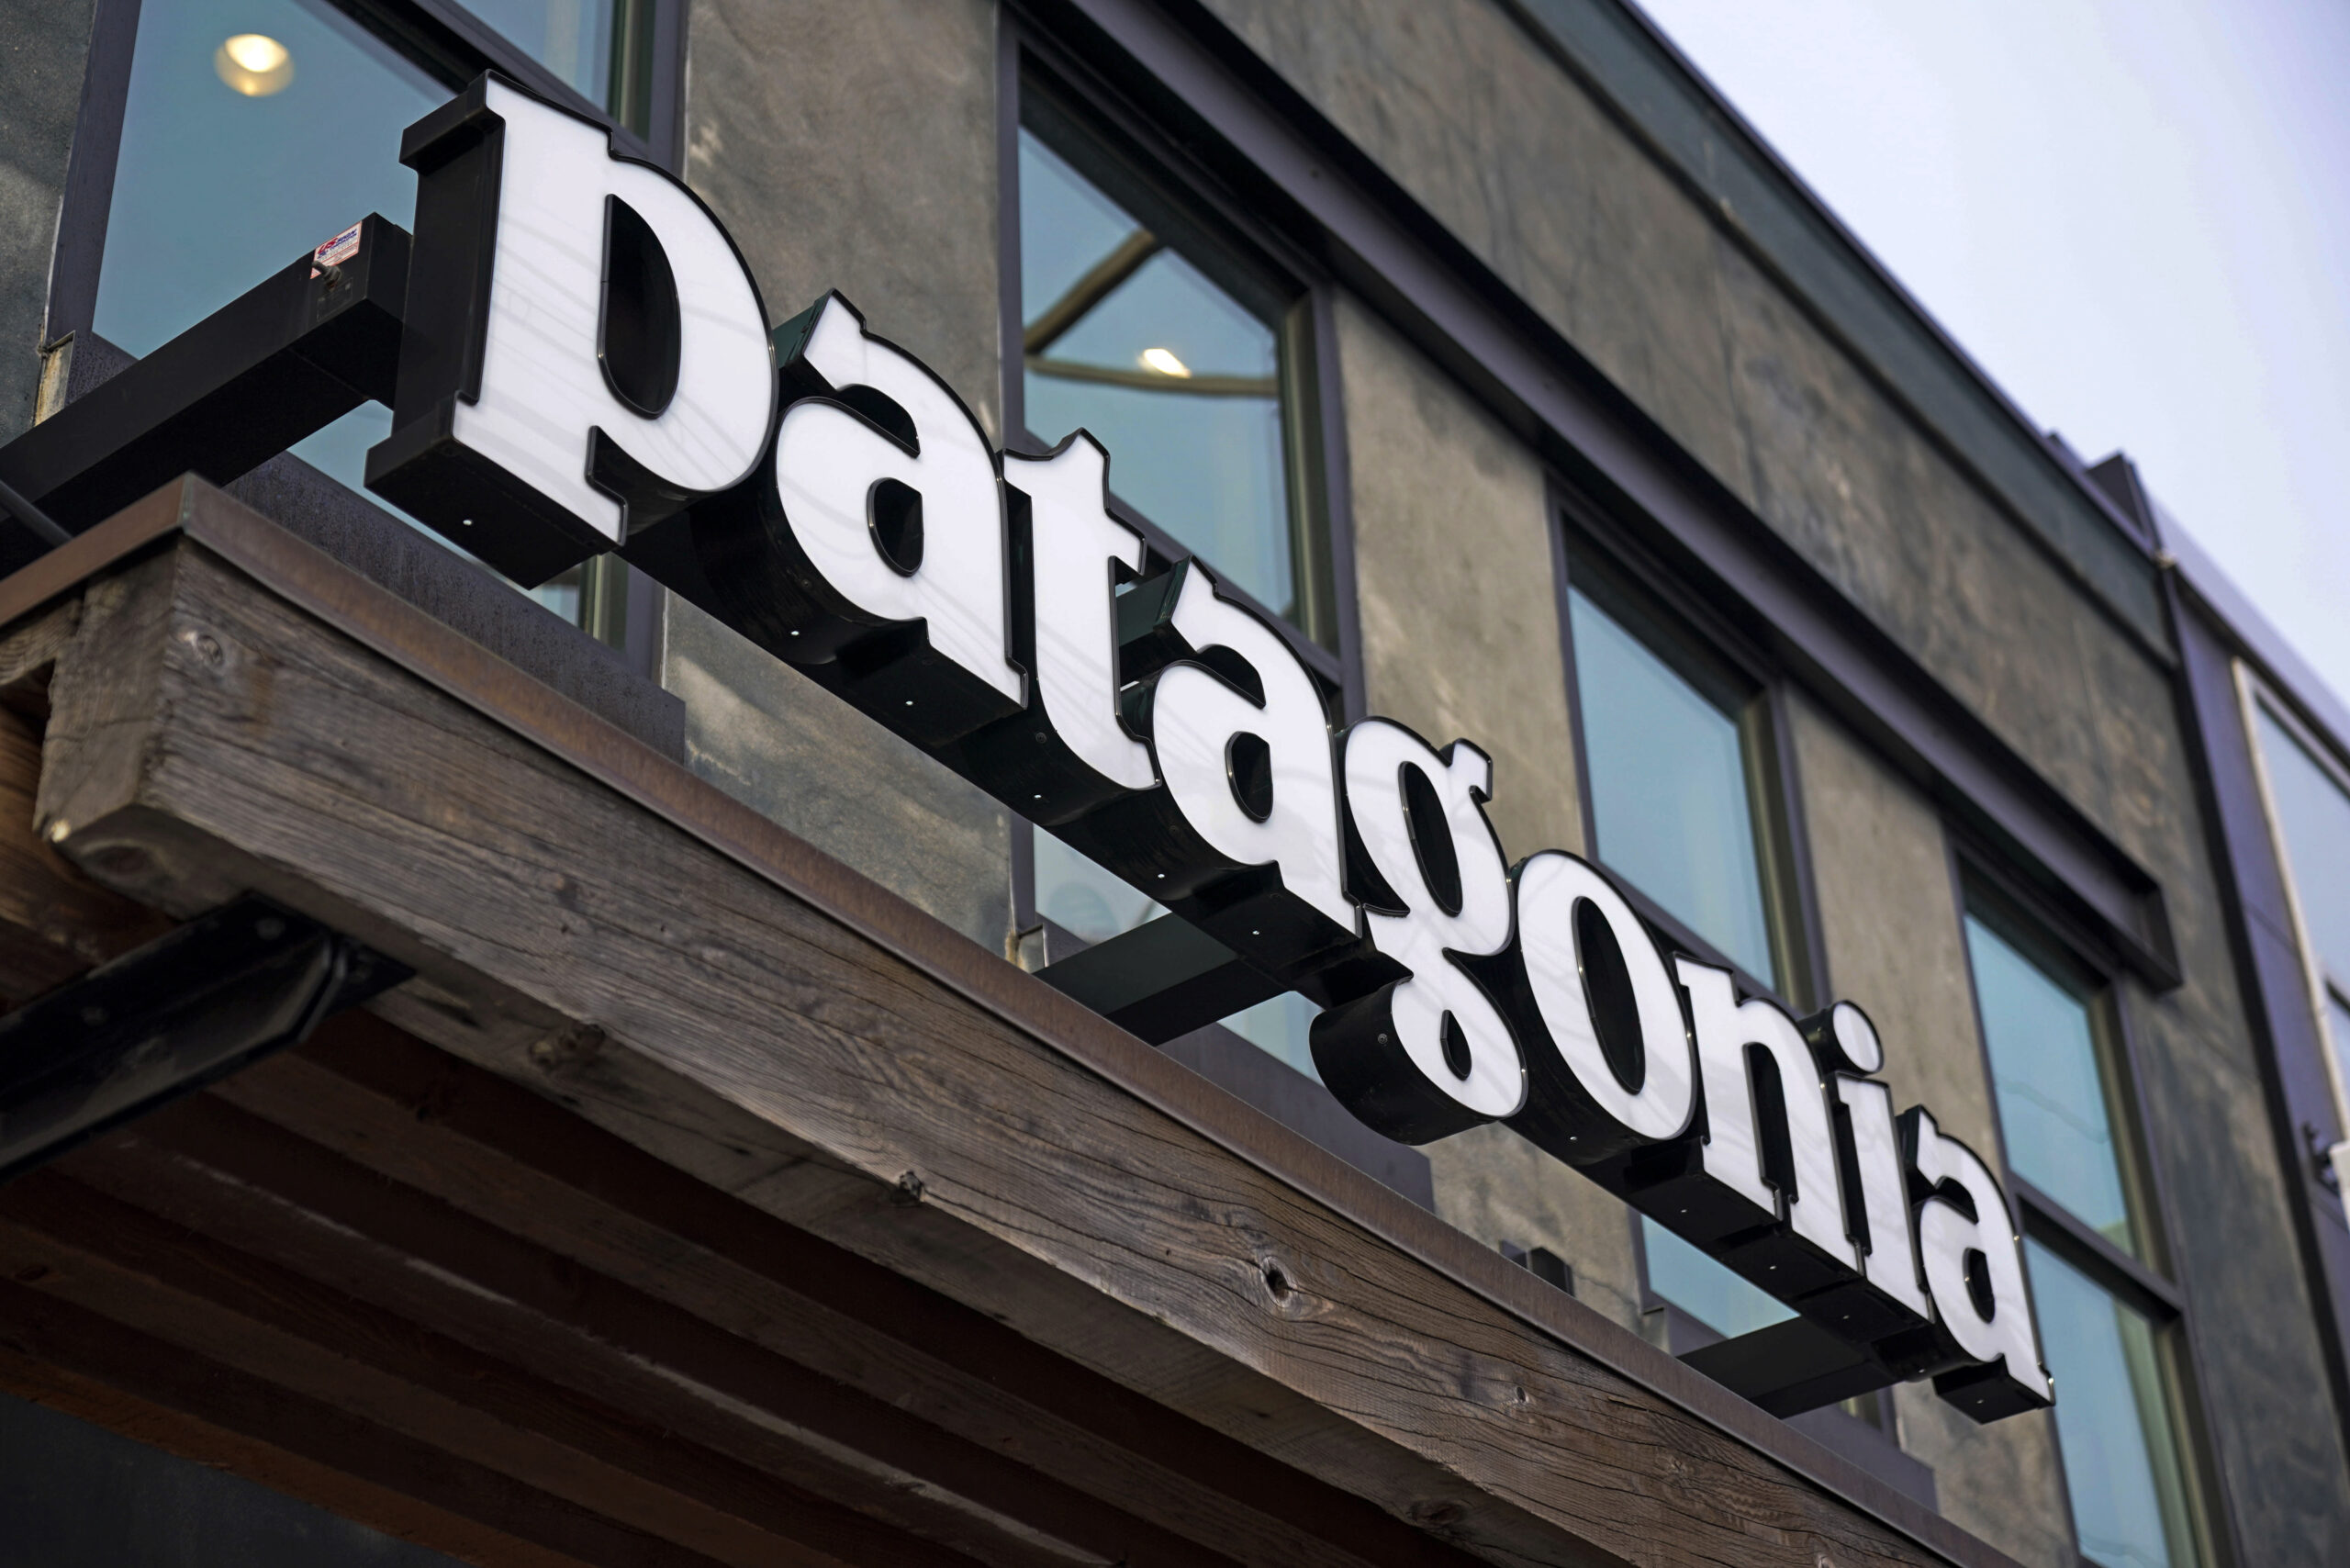 Patagonia Founder Gives Company Away to Environmental Trusts